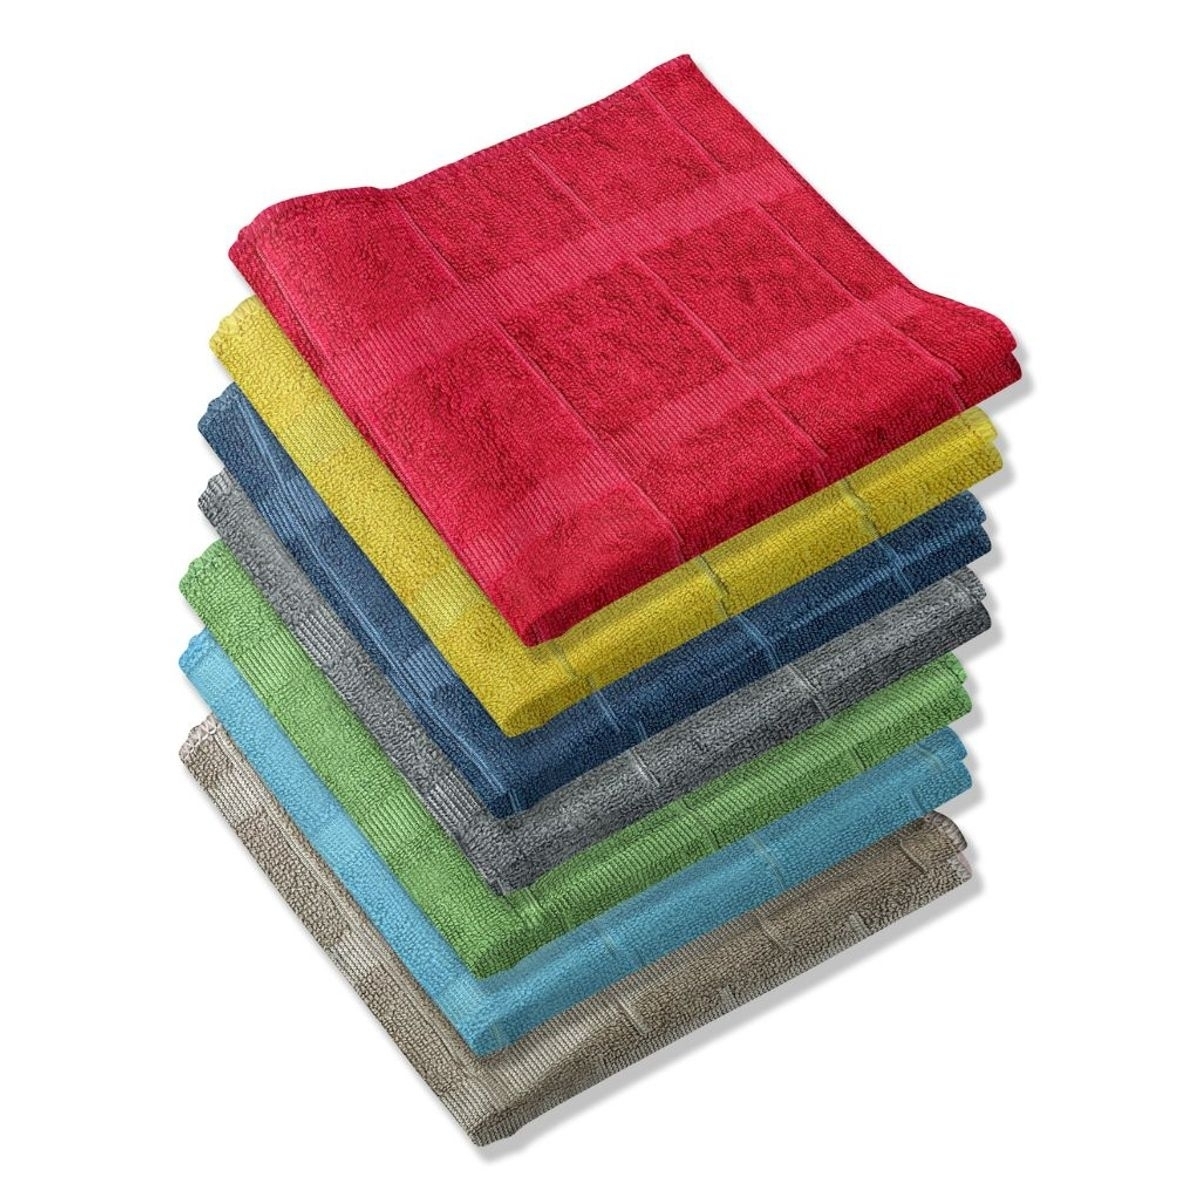 12/24-Pack: Ultra-Absorbent Multi Use Cleaning Super Soft Microfiber Dish Utility Rag Cloths - Striped, 12-Pack